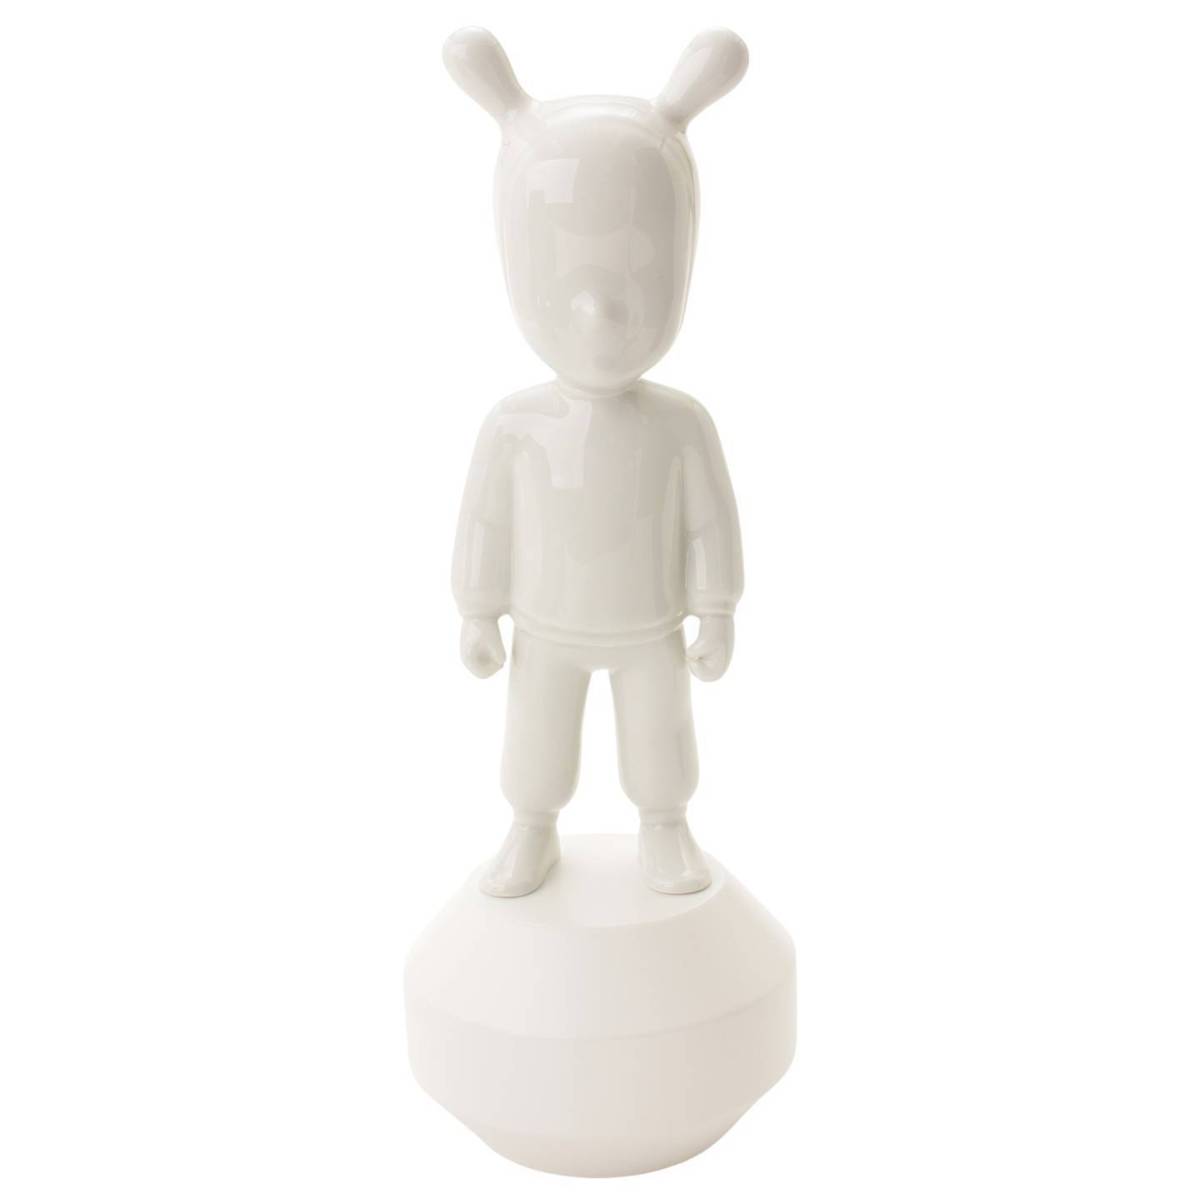 h(Lladro) the white guest little nCEAW l` u CeA 7732 zCg